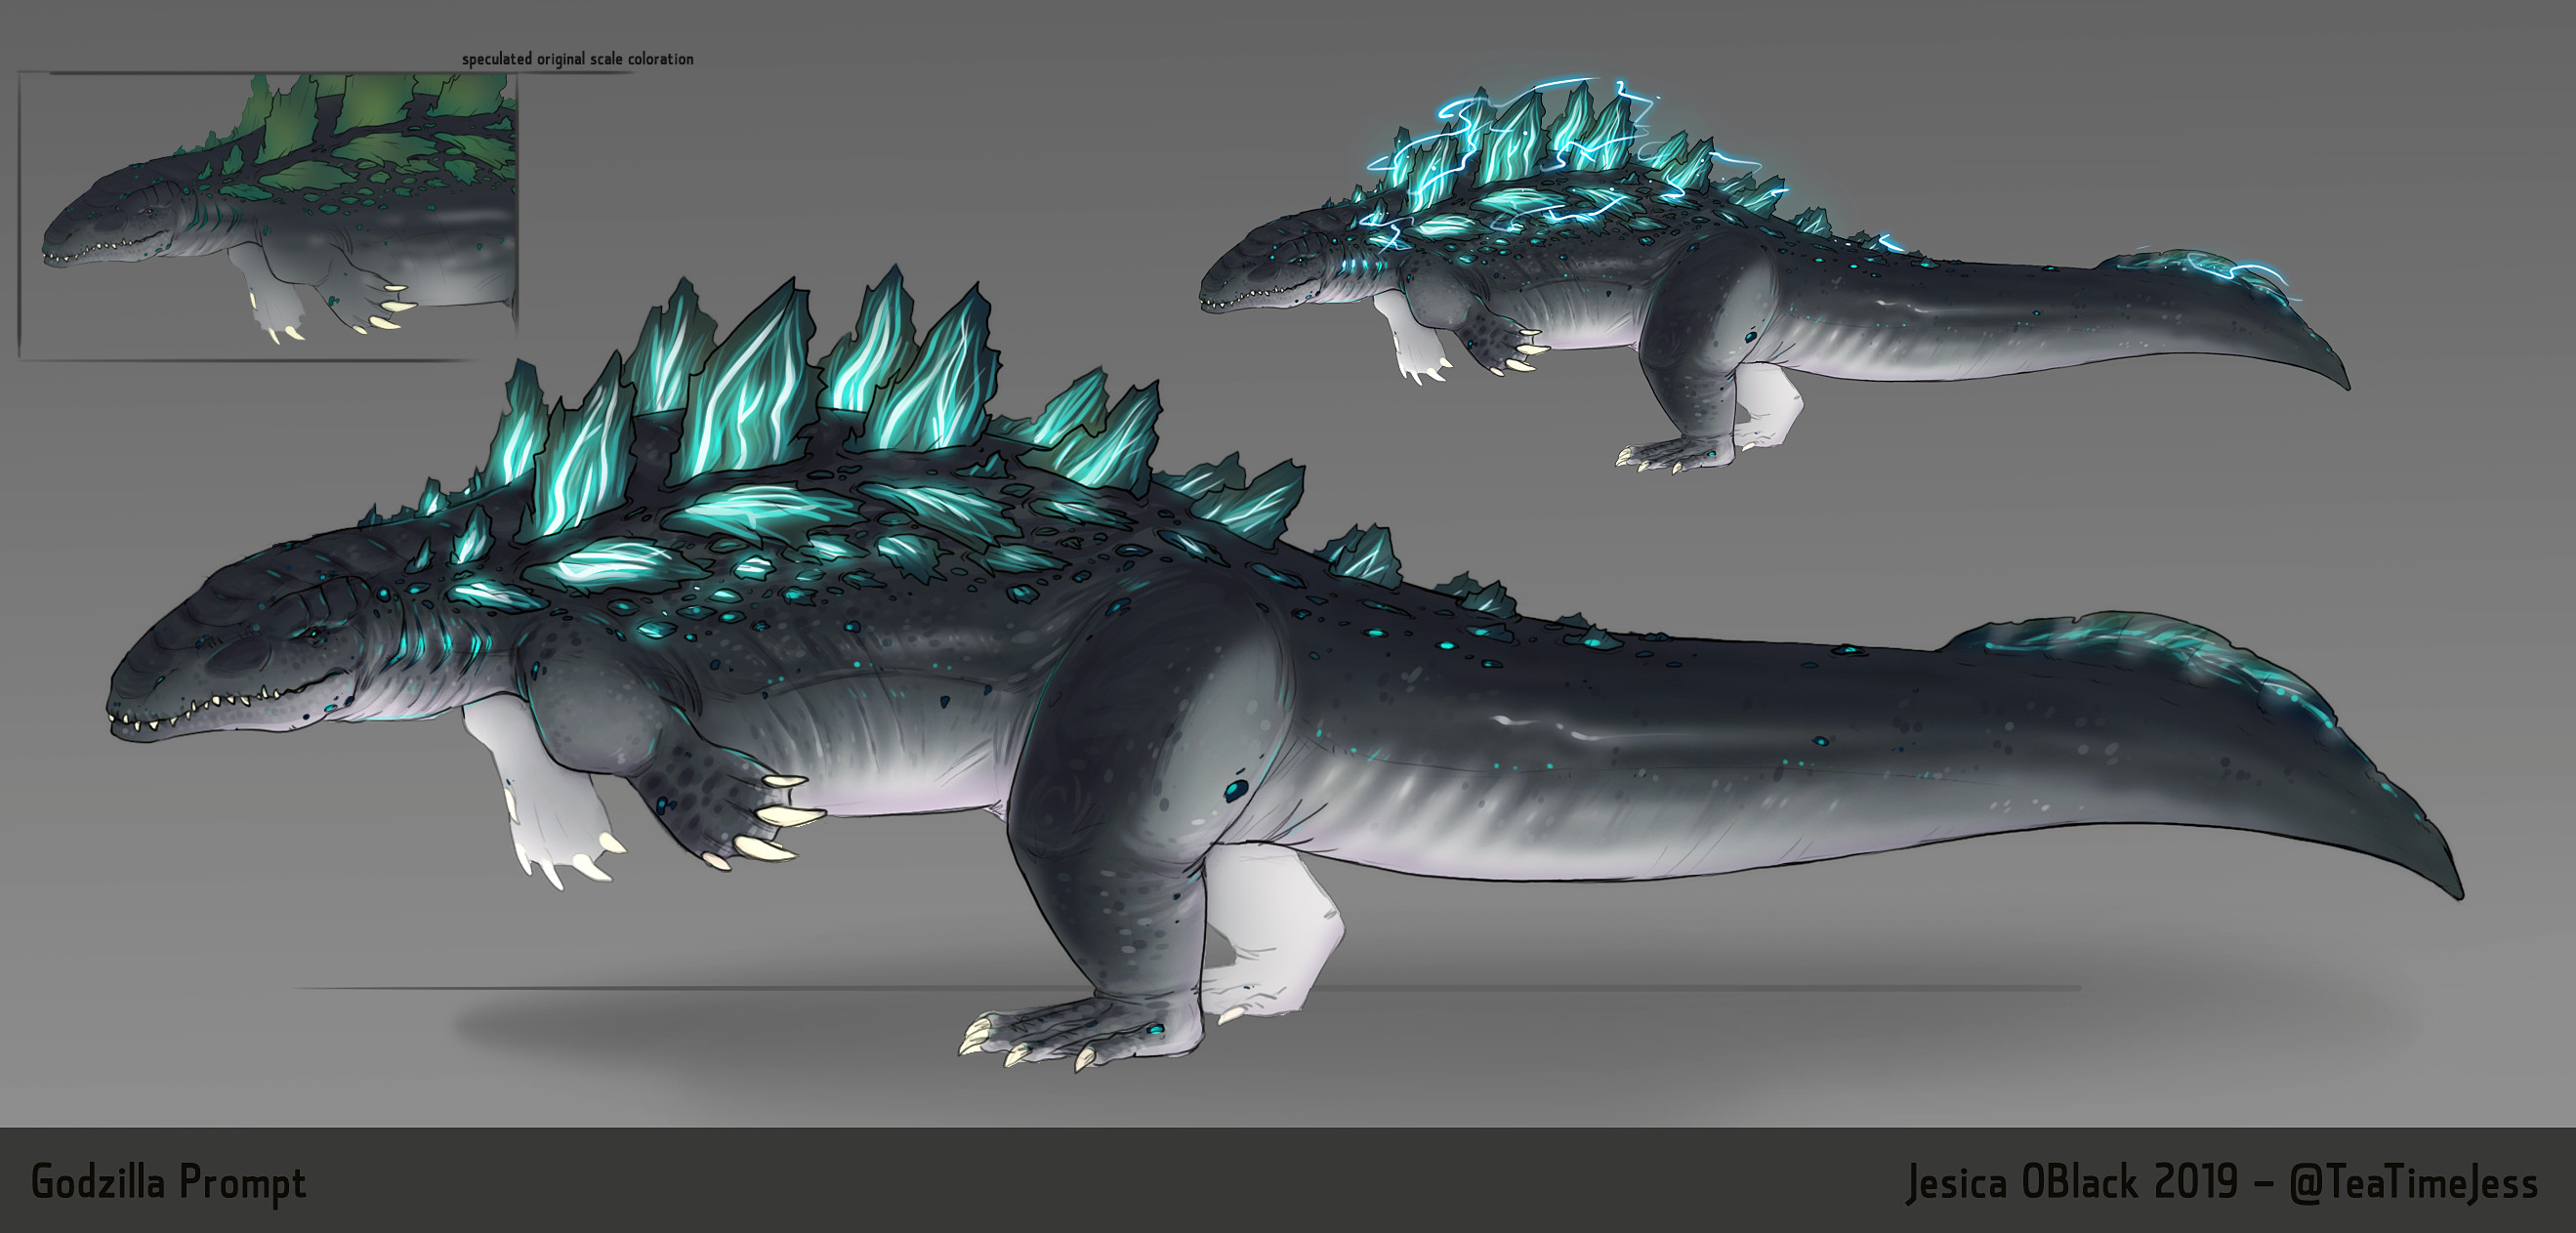 Godzilla Redesign for RJ Palmer's contest! I took the 'sea creature' approach. 